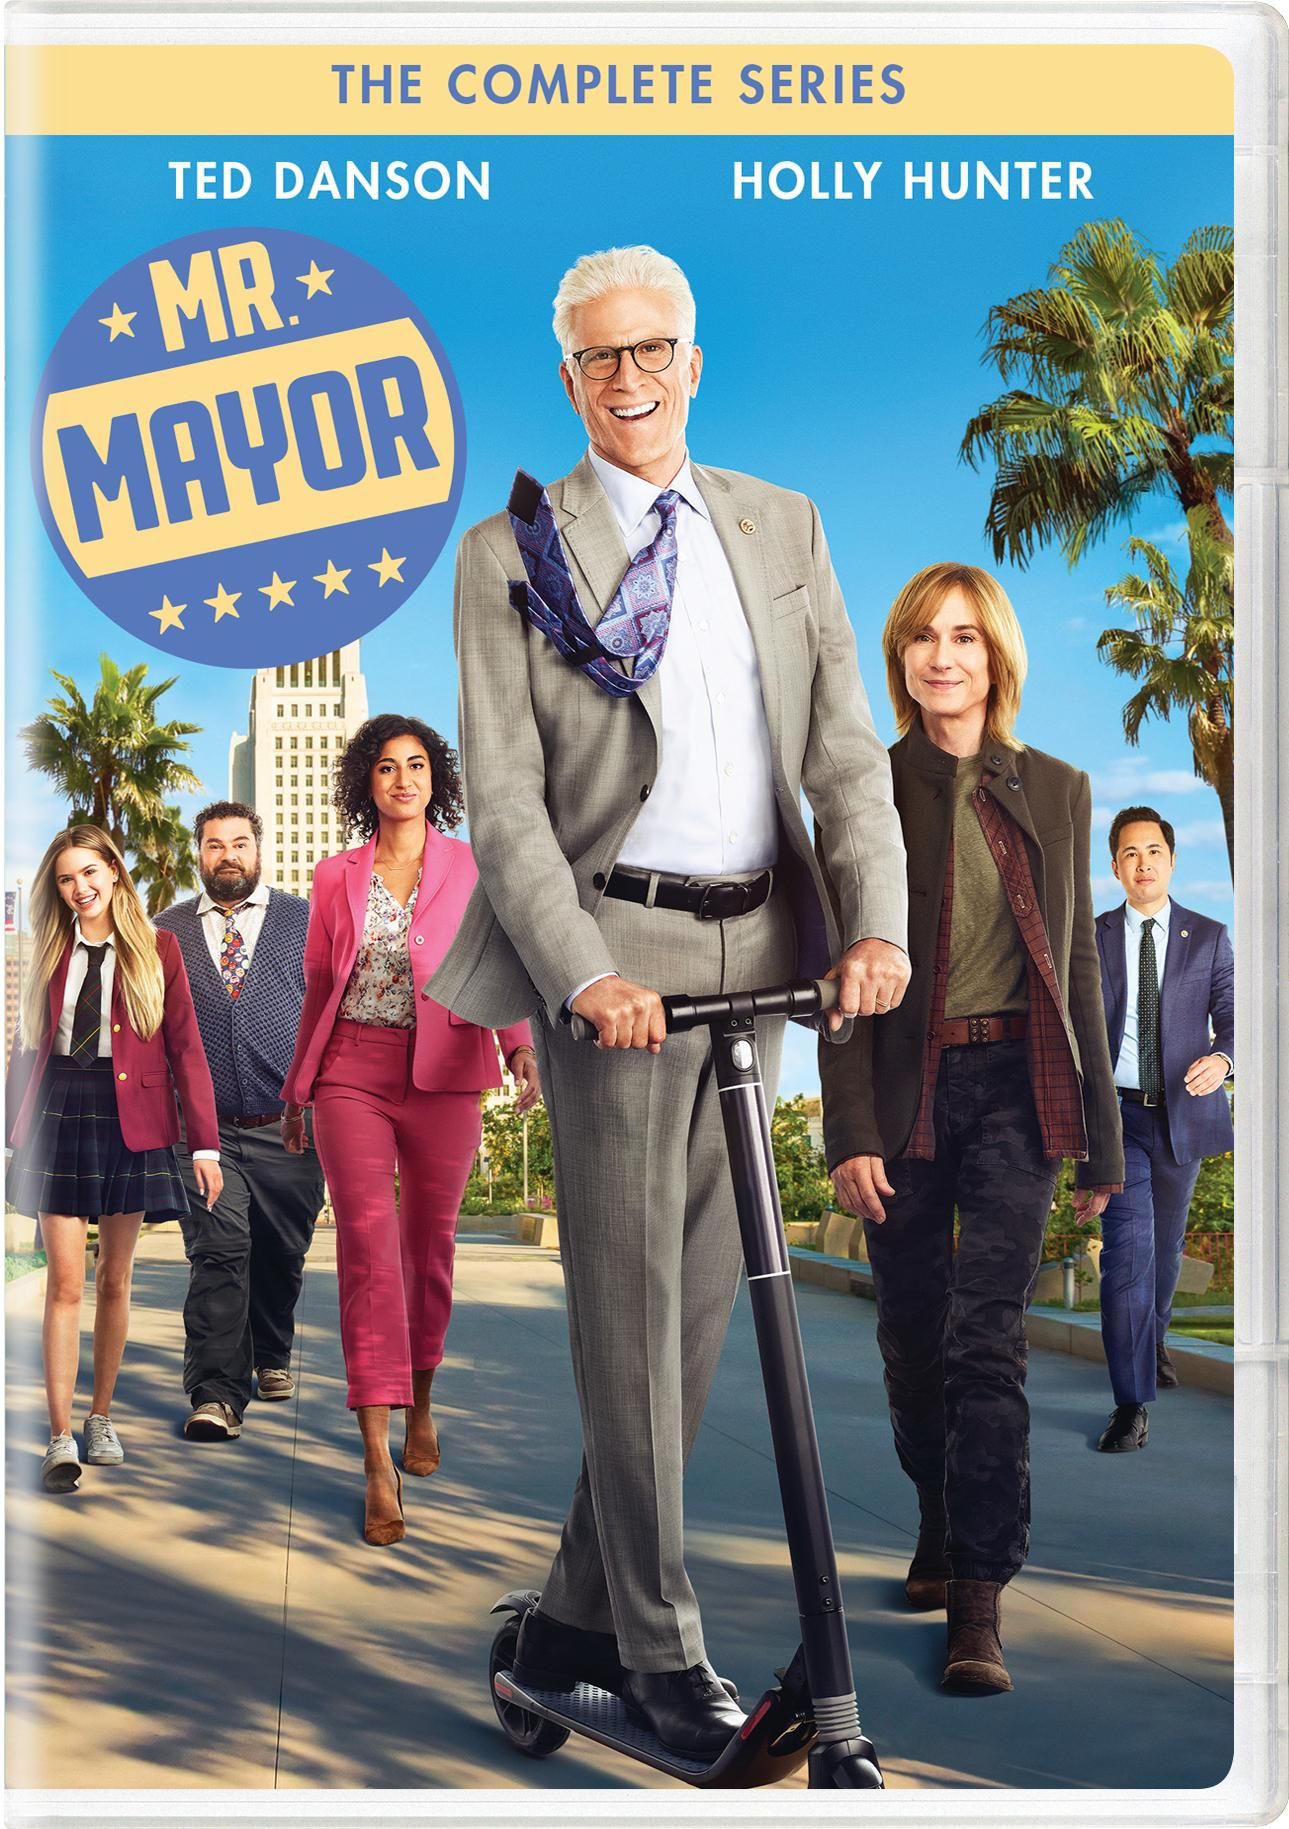 Mr. Mayor: The Complete Series - DVD [ 2021 ]  - Comedy Television On DVD - TV Shows On GRUV